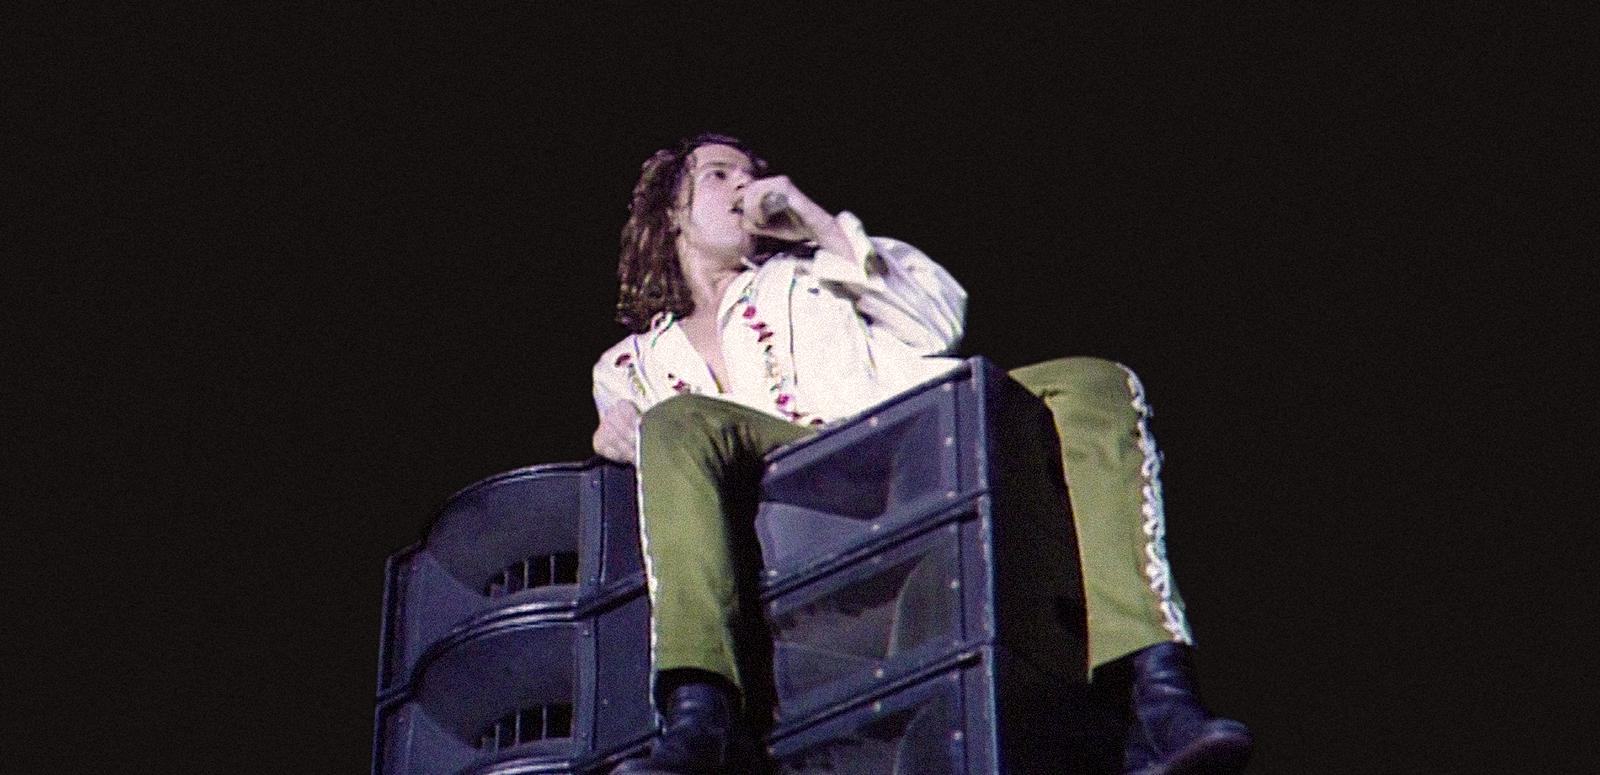 Michael Hutchence of INXS in concert, singing while seated on a loudspeaker